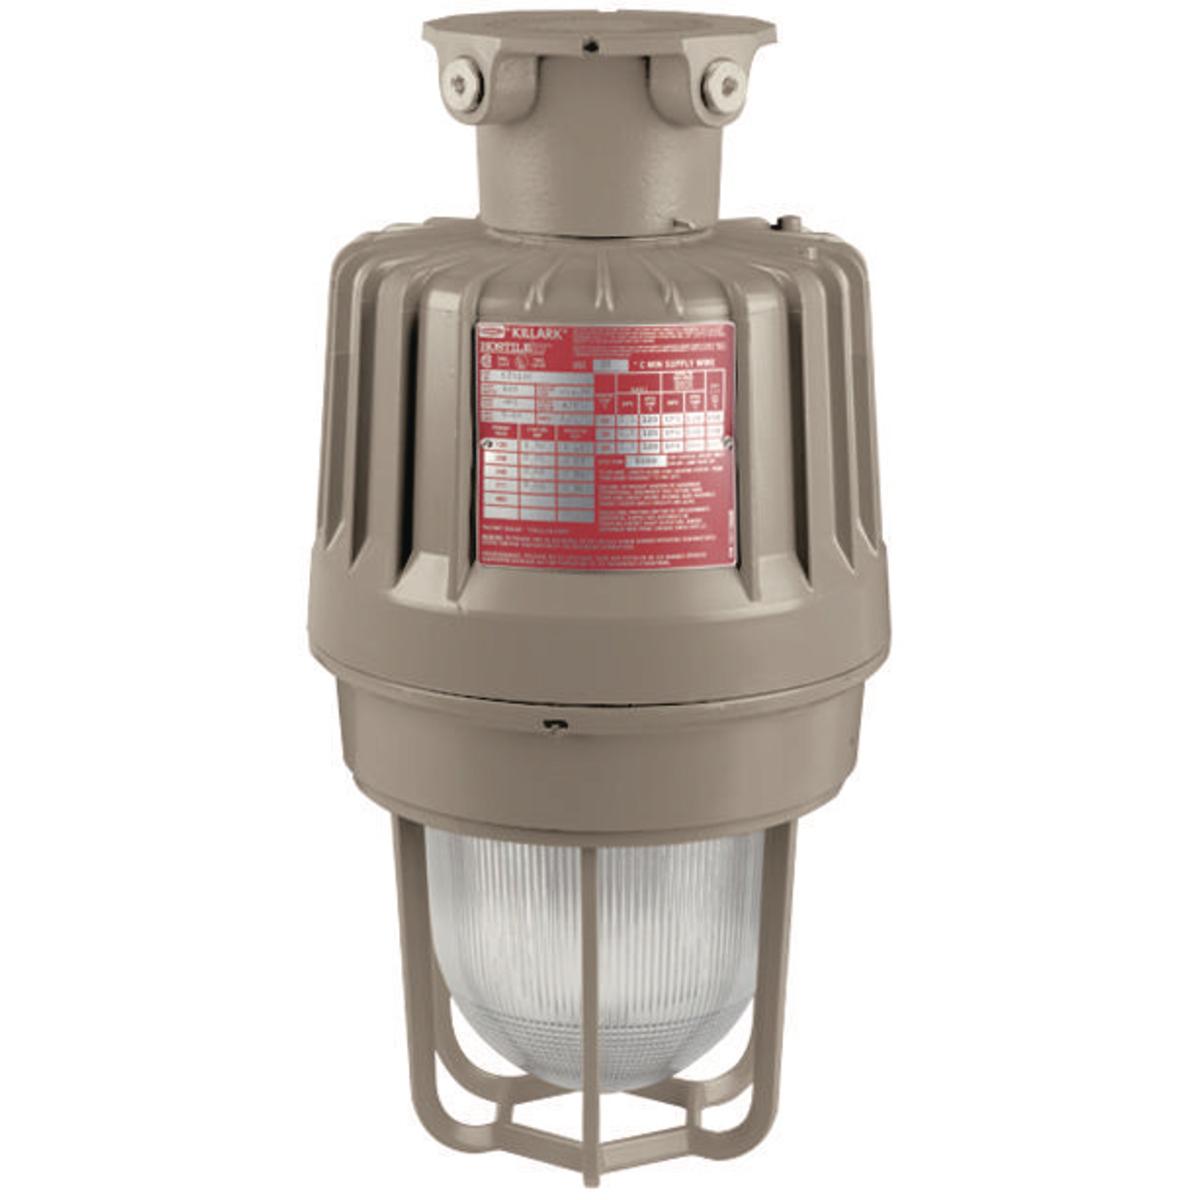 Hubbell EZP258X2G 250W Quadri-Volt Pulse-Start Metal Halide 50Hz Ceiling Mount with Guard  ; Three light sources – High Pressure Sodium (50-400W), Metal Halide (70-400W) and Pulse Start Metal Halide (175-400W) ; Mounting choice –Pendant, ceiling, 25˚ stanchion or 90˚ wall 